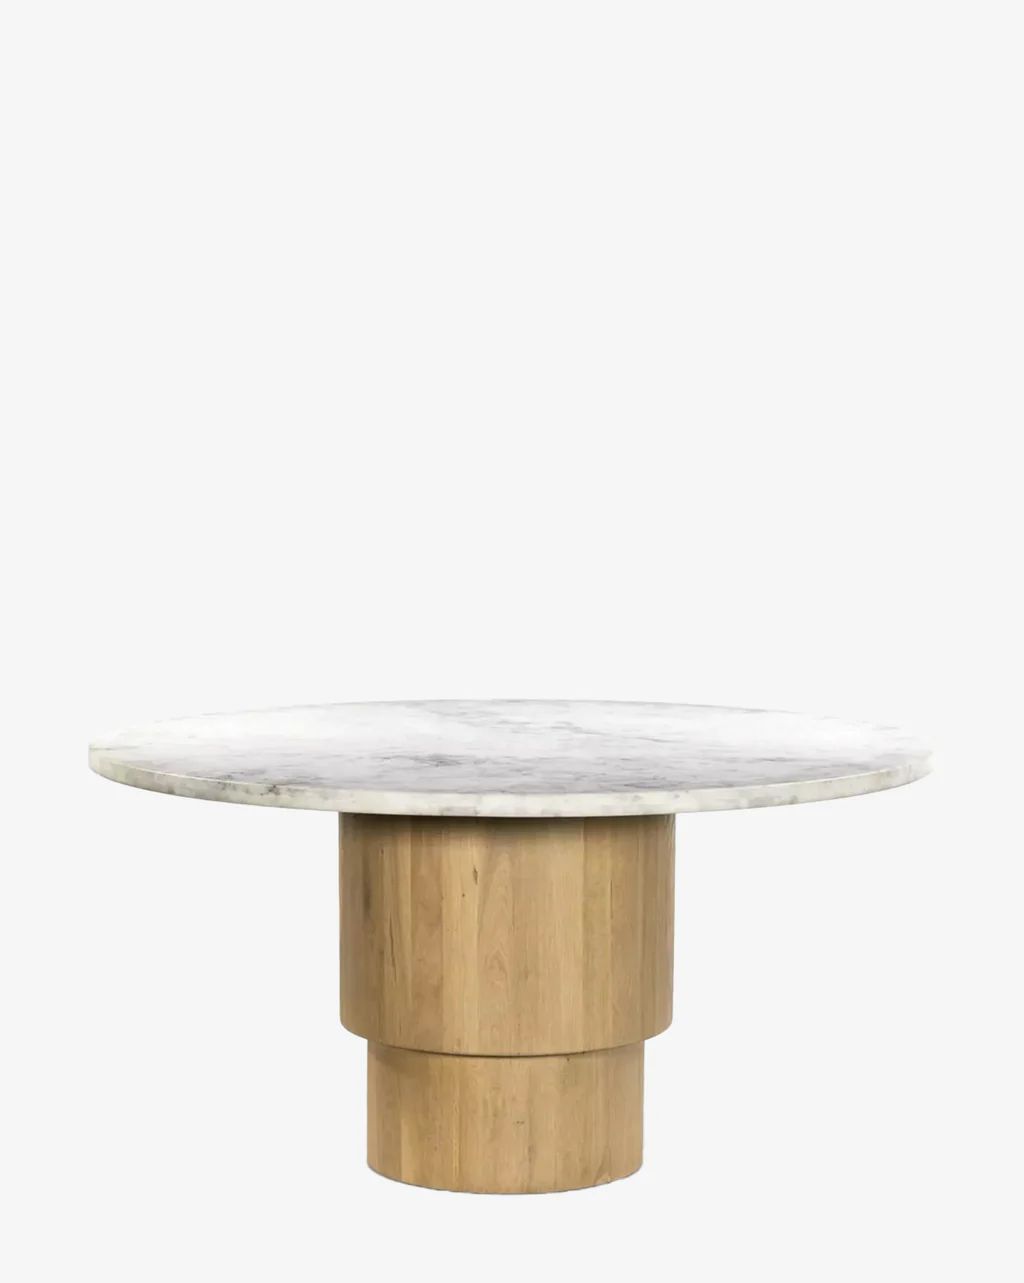 Kinlaw 60" Round Dining Table | McGee & Co.